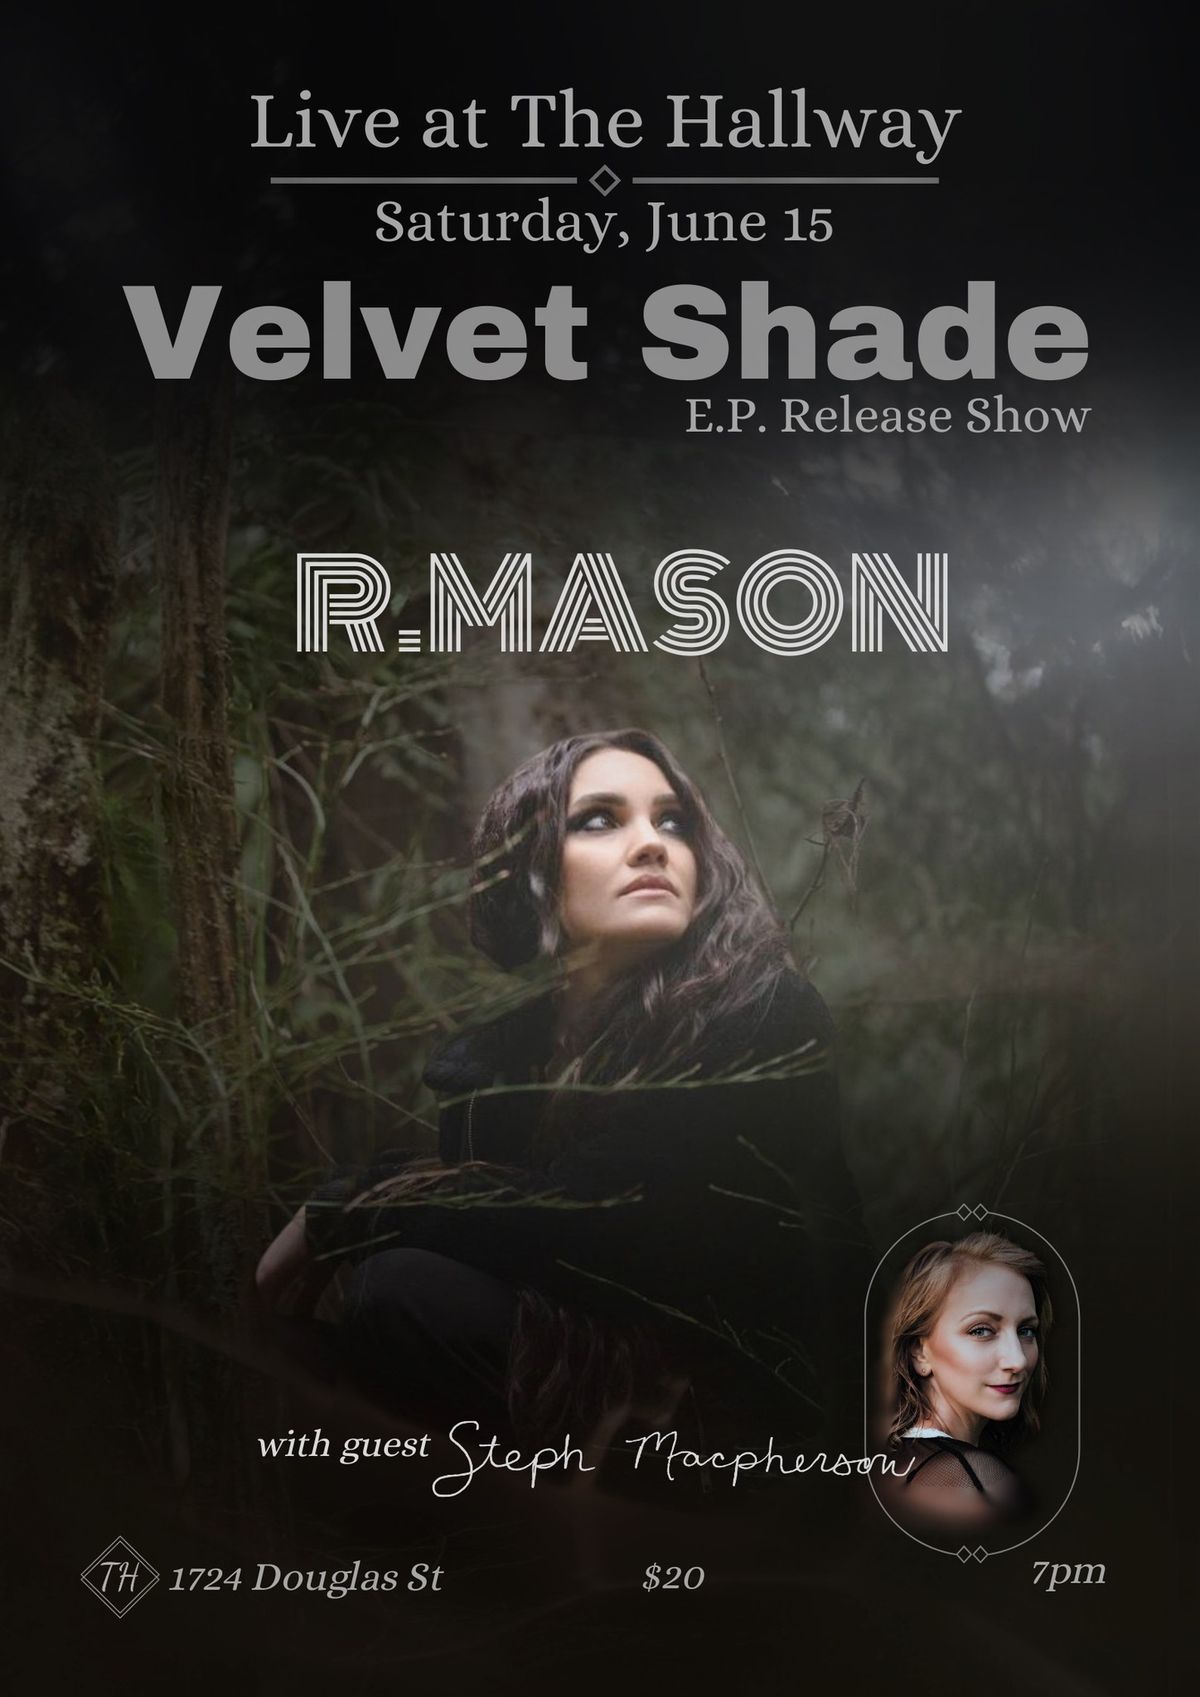 Velvet Shade EP release show at The Hallway